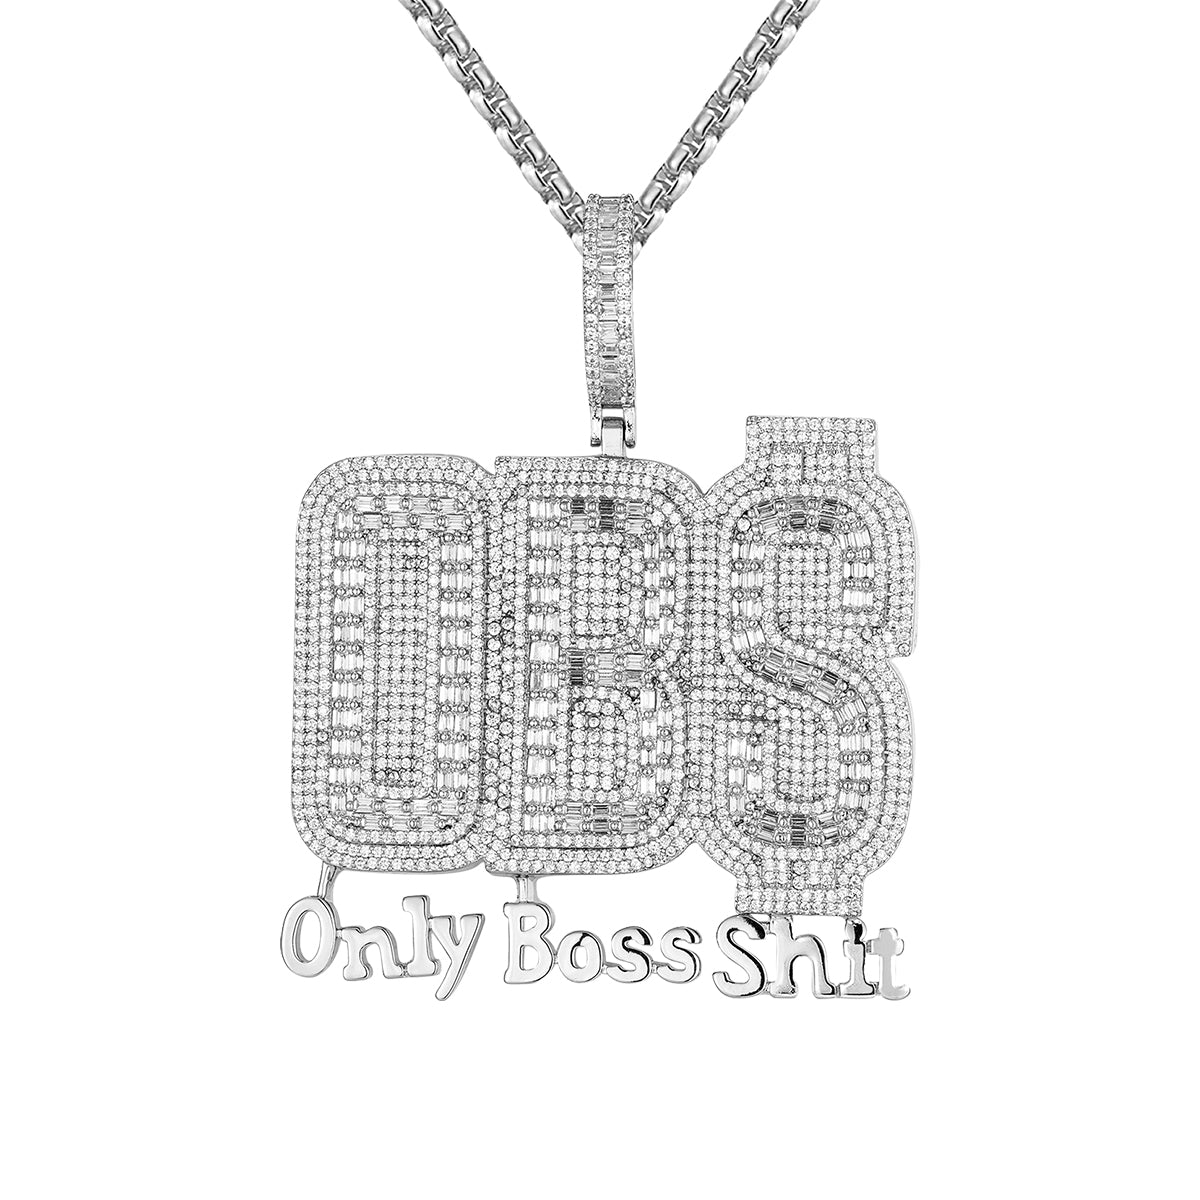 OBS Only Boss Shit Icy Mens Sterling Silver White Tone Pendant